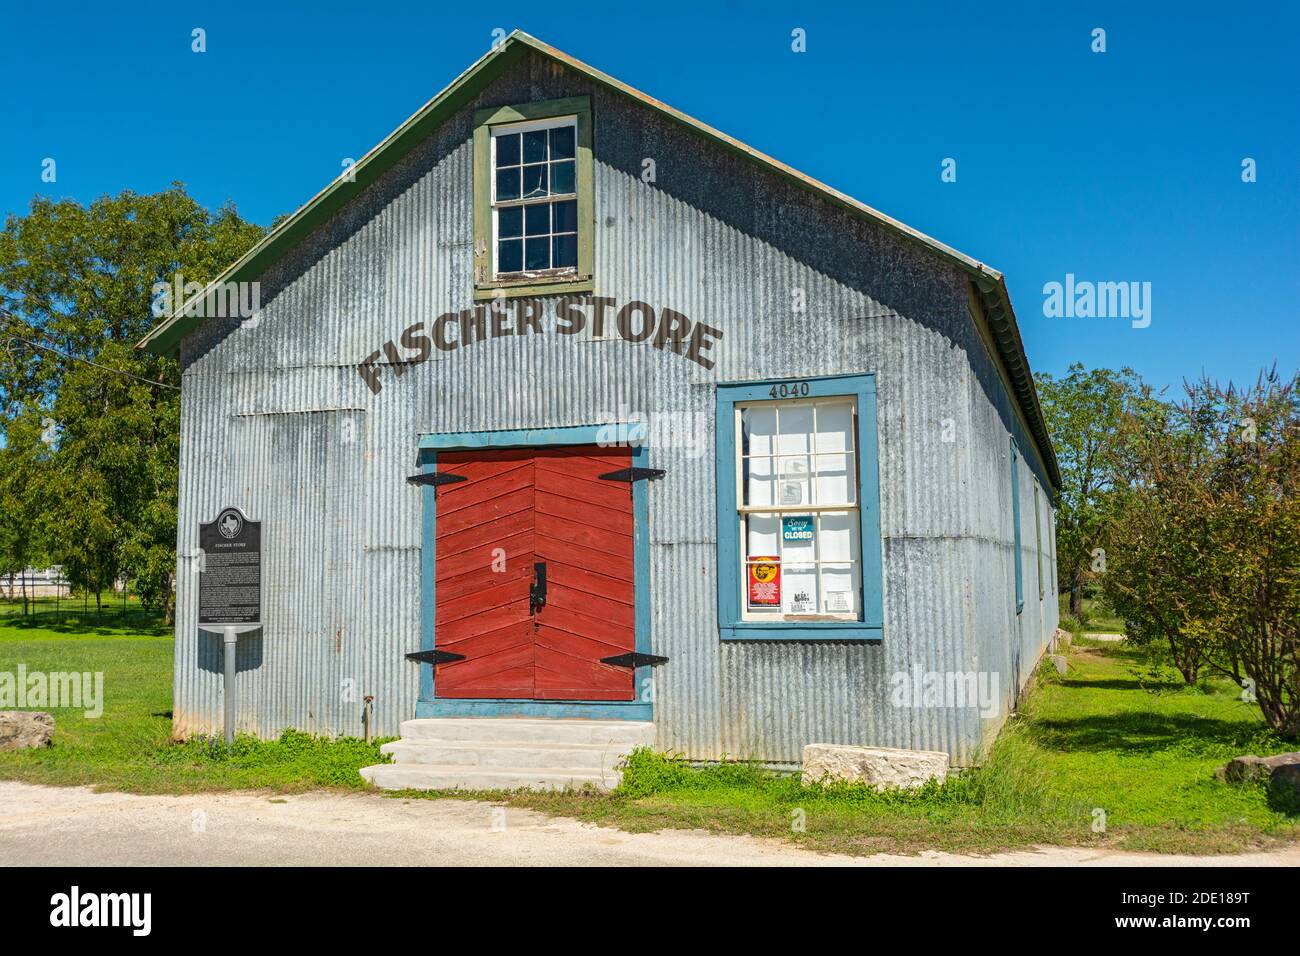 Texas, Comal County, Fischer Store built 1902, historical imformation sign Stock Photo